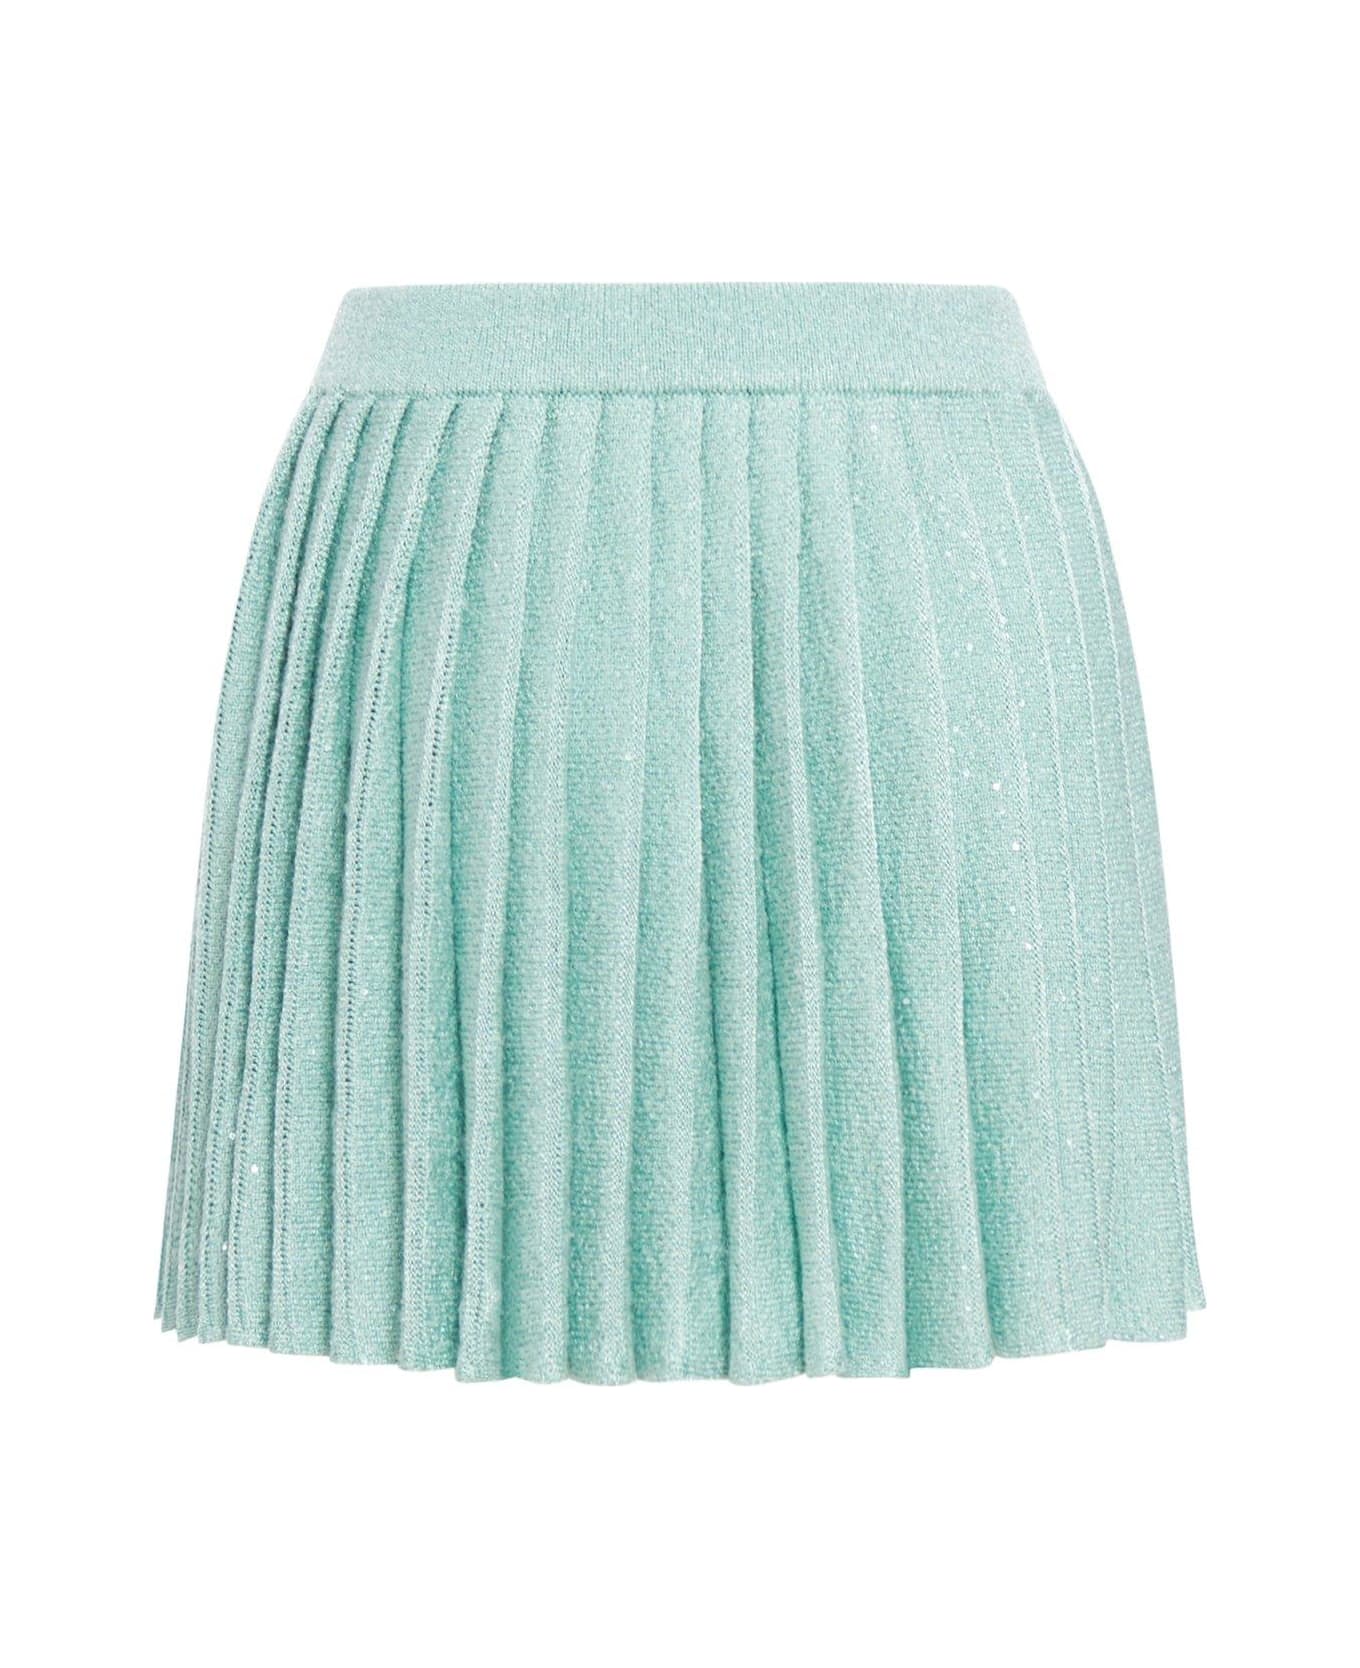 self-portrait Sequin Embellished Pleated Mini Knitted Skirt - BLUE